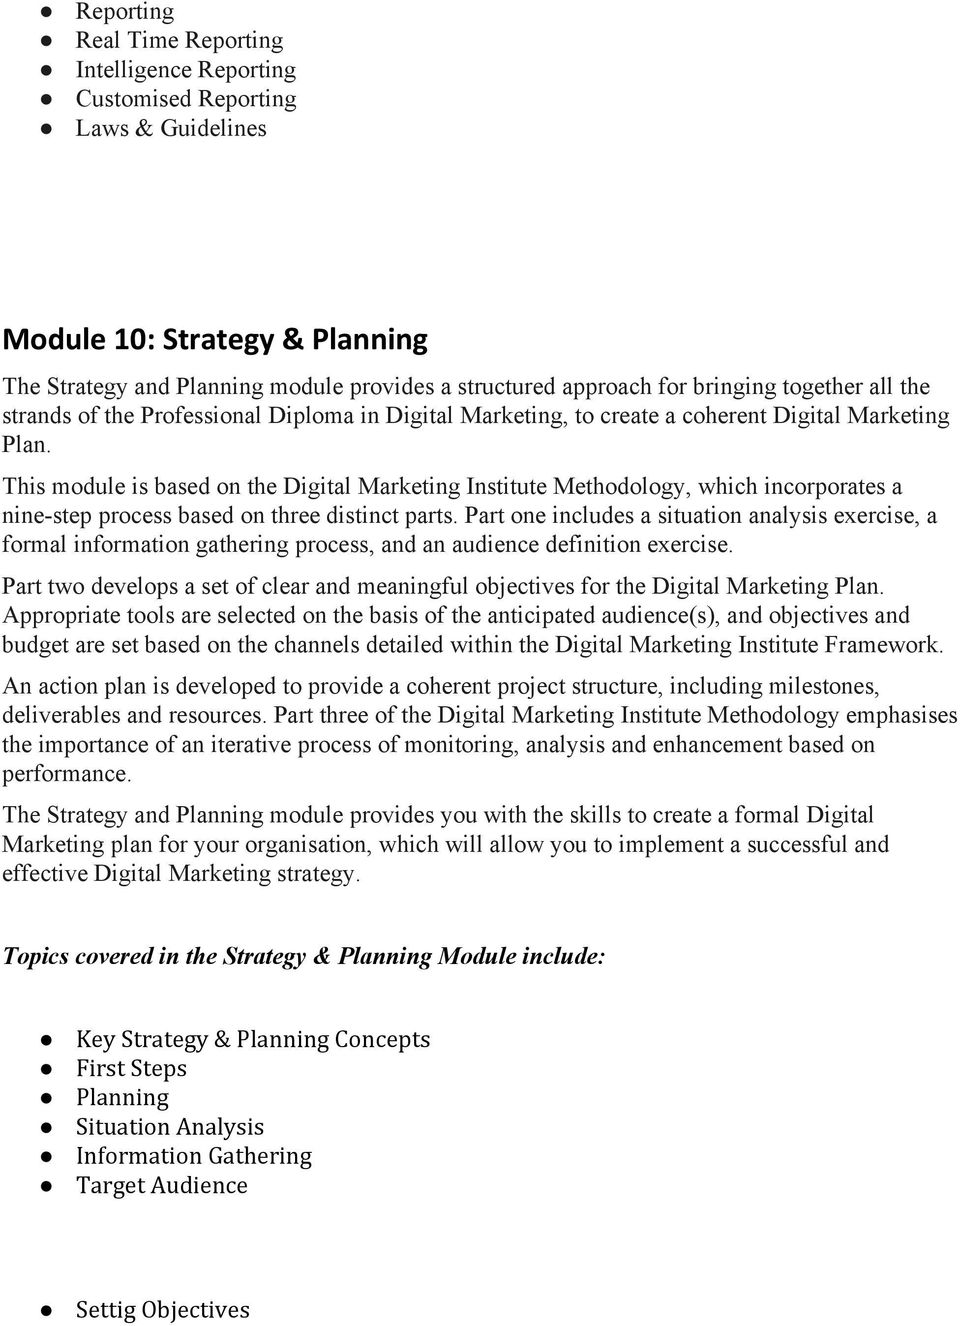 This module is based on the Digital Marketing Institute Methodology, which incorporates a nine step process based on three distinct parts.